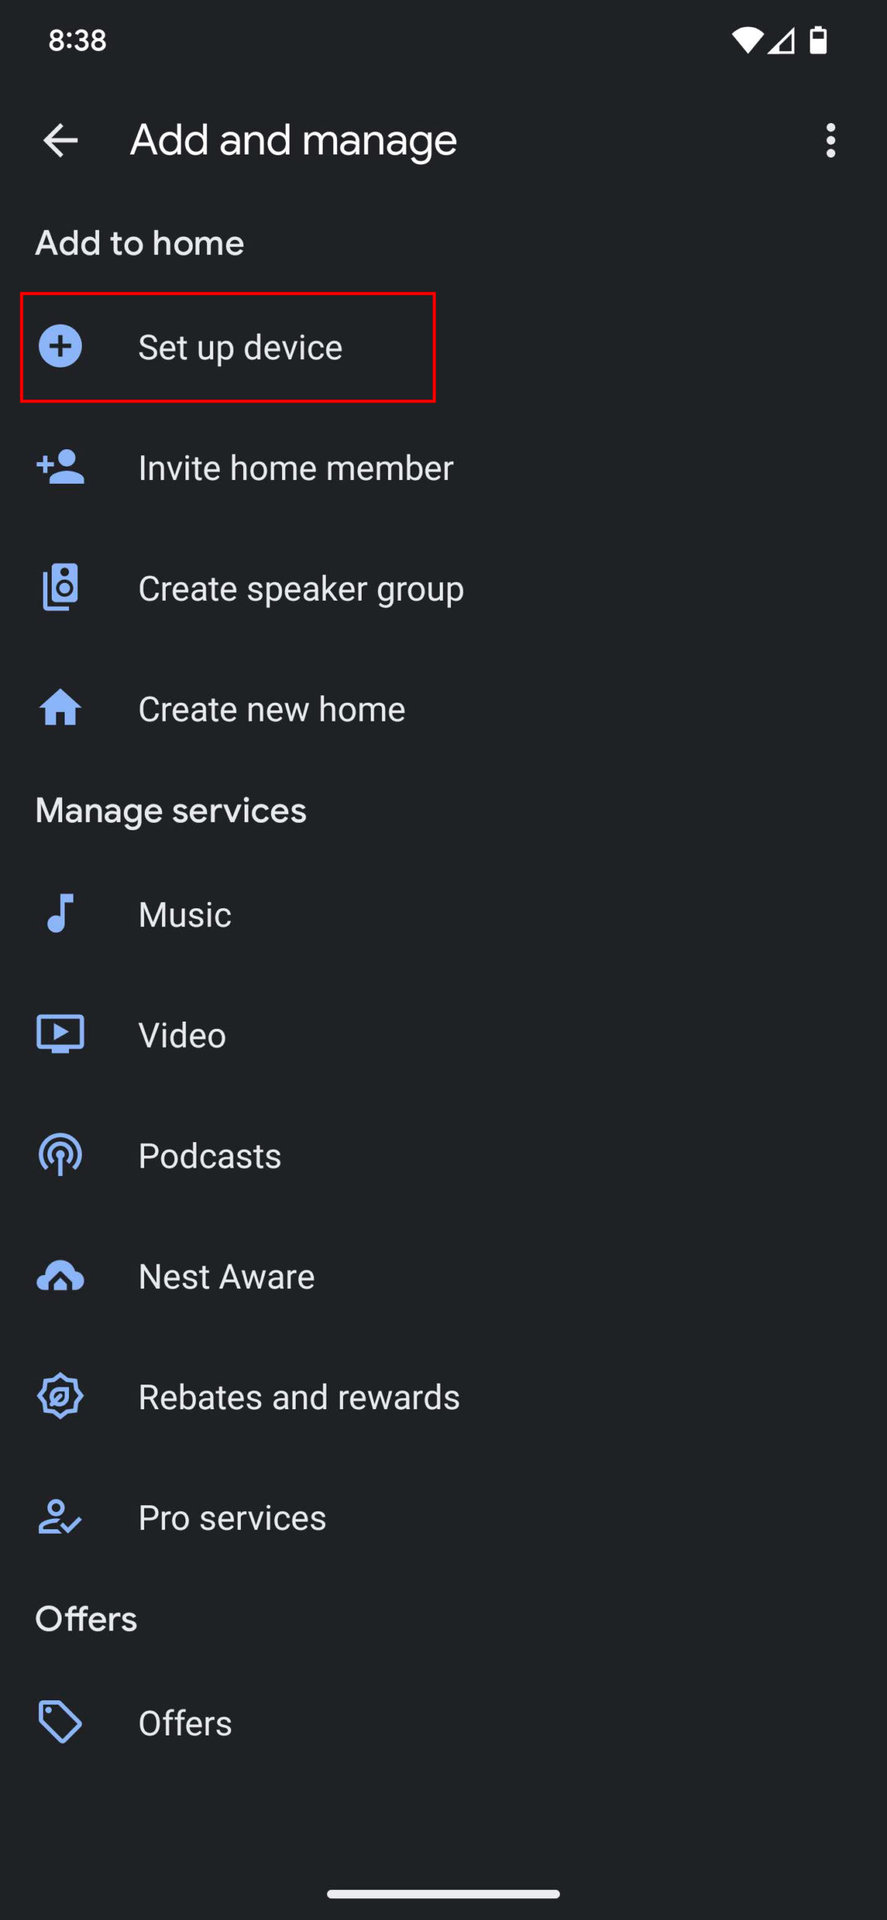 How to set up a new device with Google Home app 2